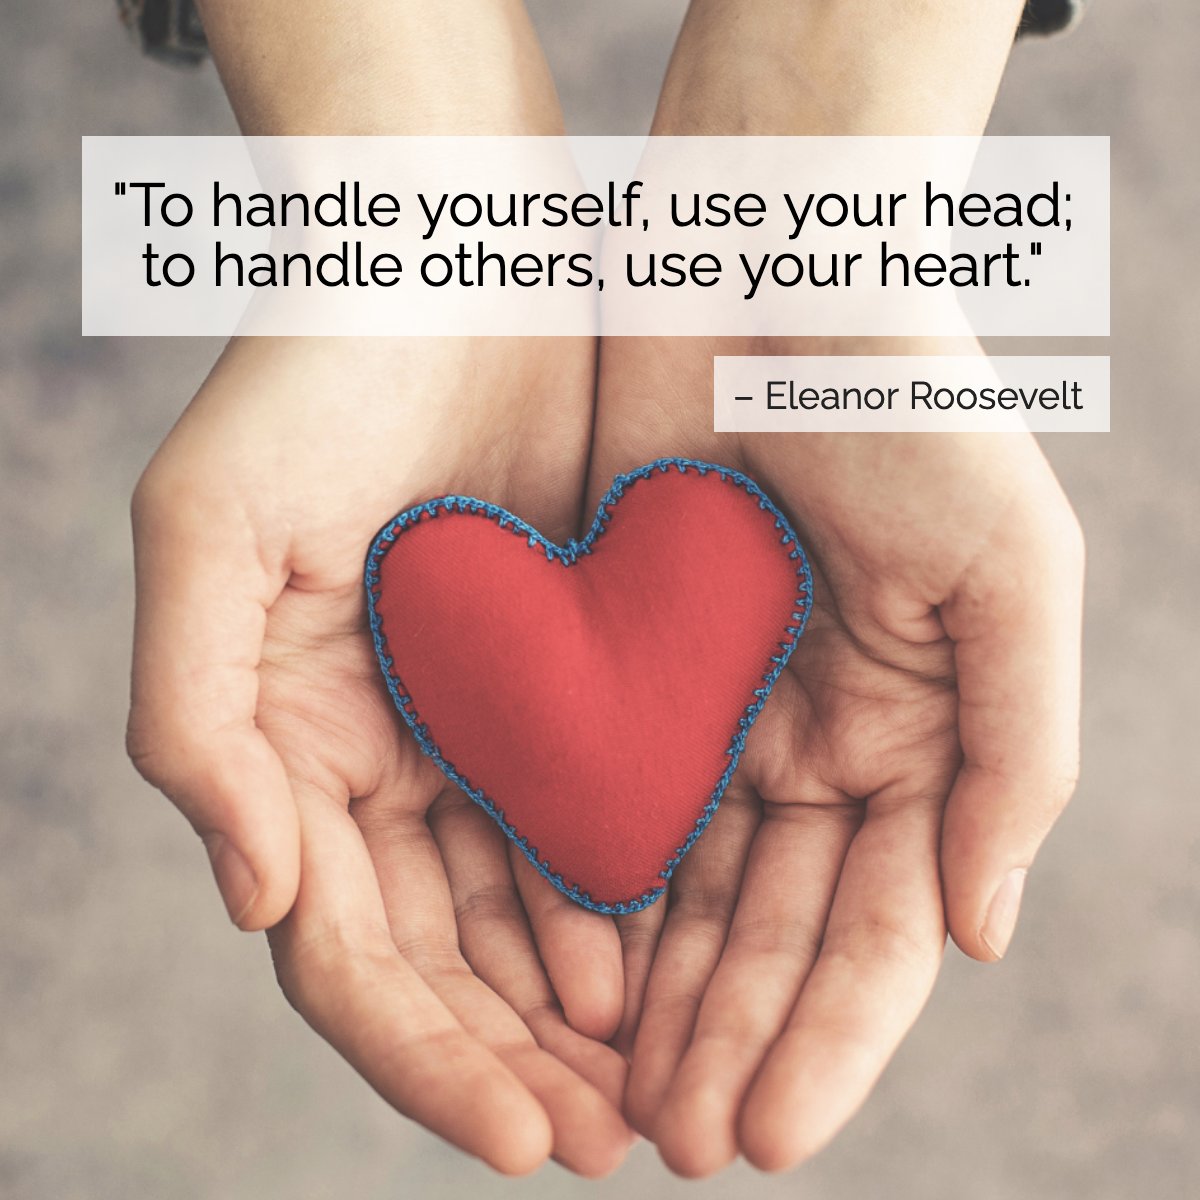 Eleanor Roosevelt was an American political figure, diplomat, and activist. 

She served as the first lady of the United States from 1933 to 1945!

#inspiring #quote #eleanorroosevelt #inspirational 
 #riscosells #theriscogroup #kwmainline #Uptownliving